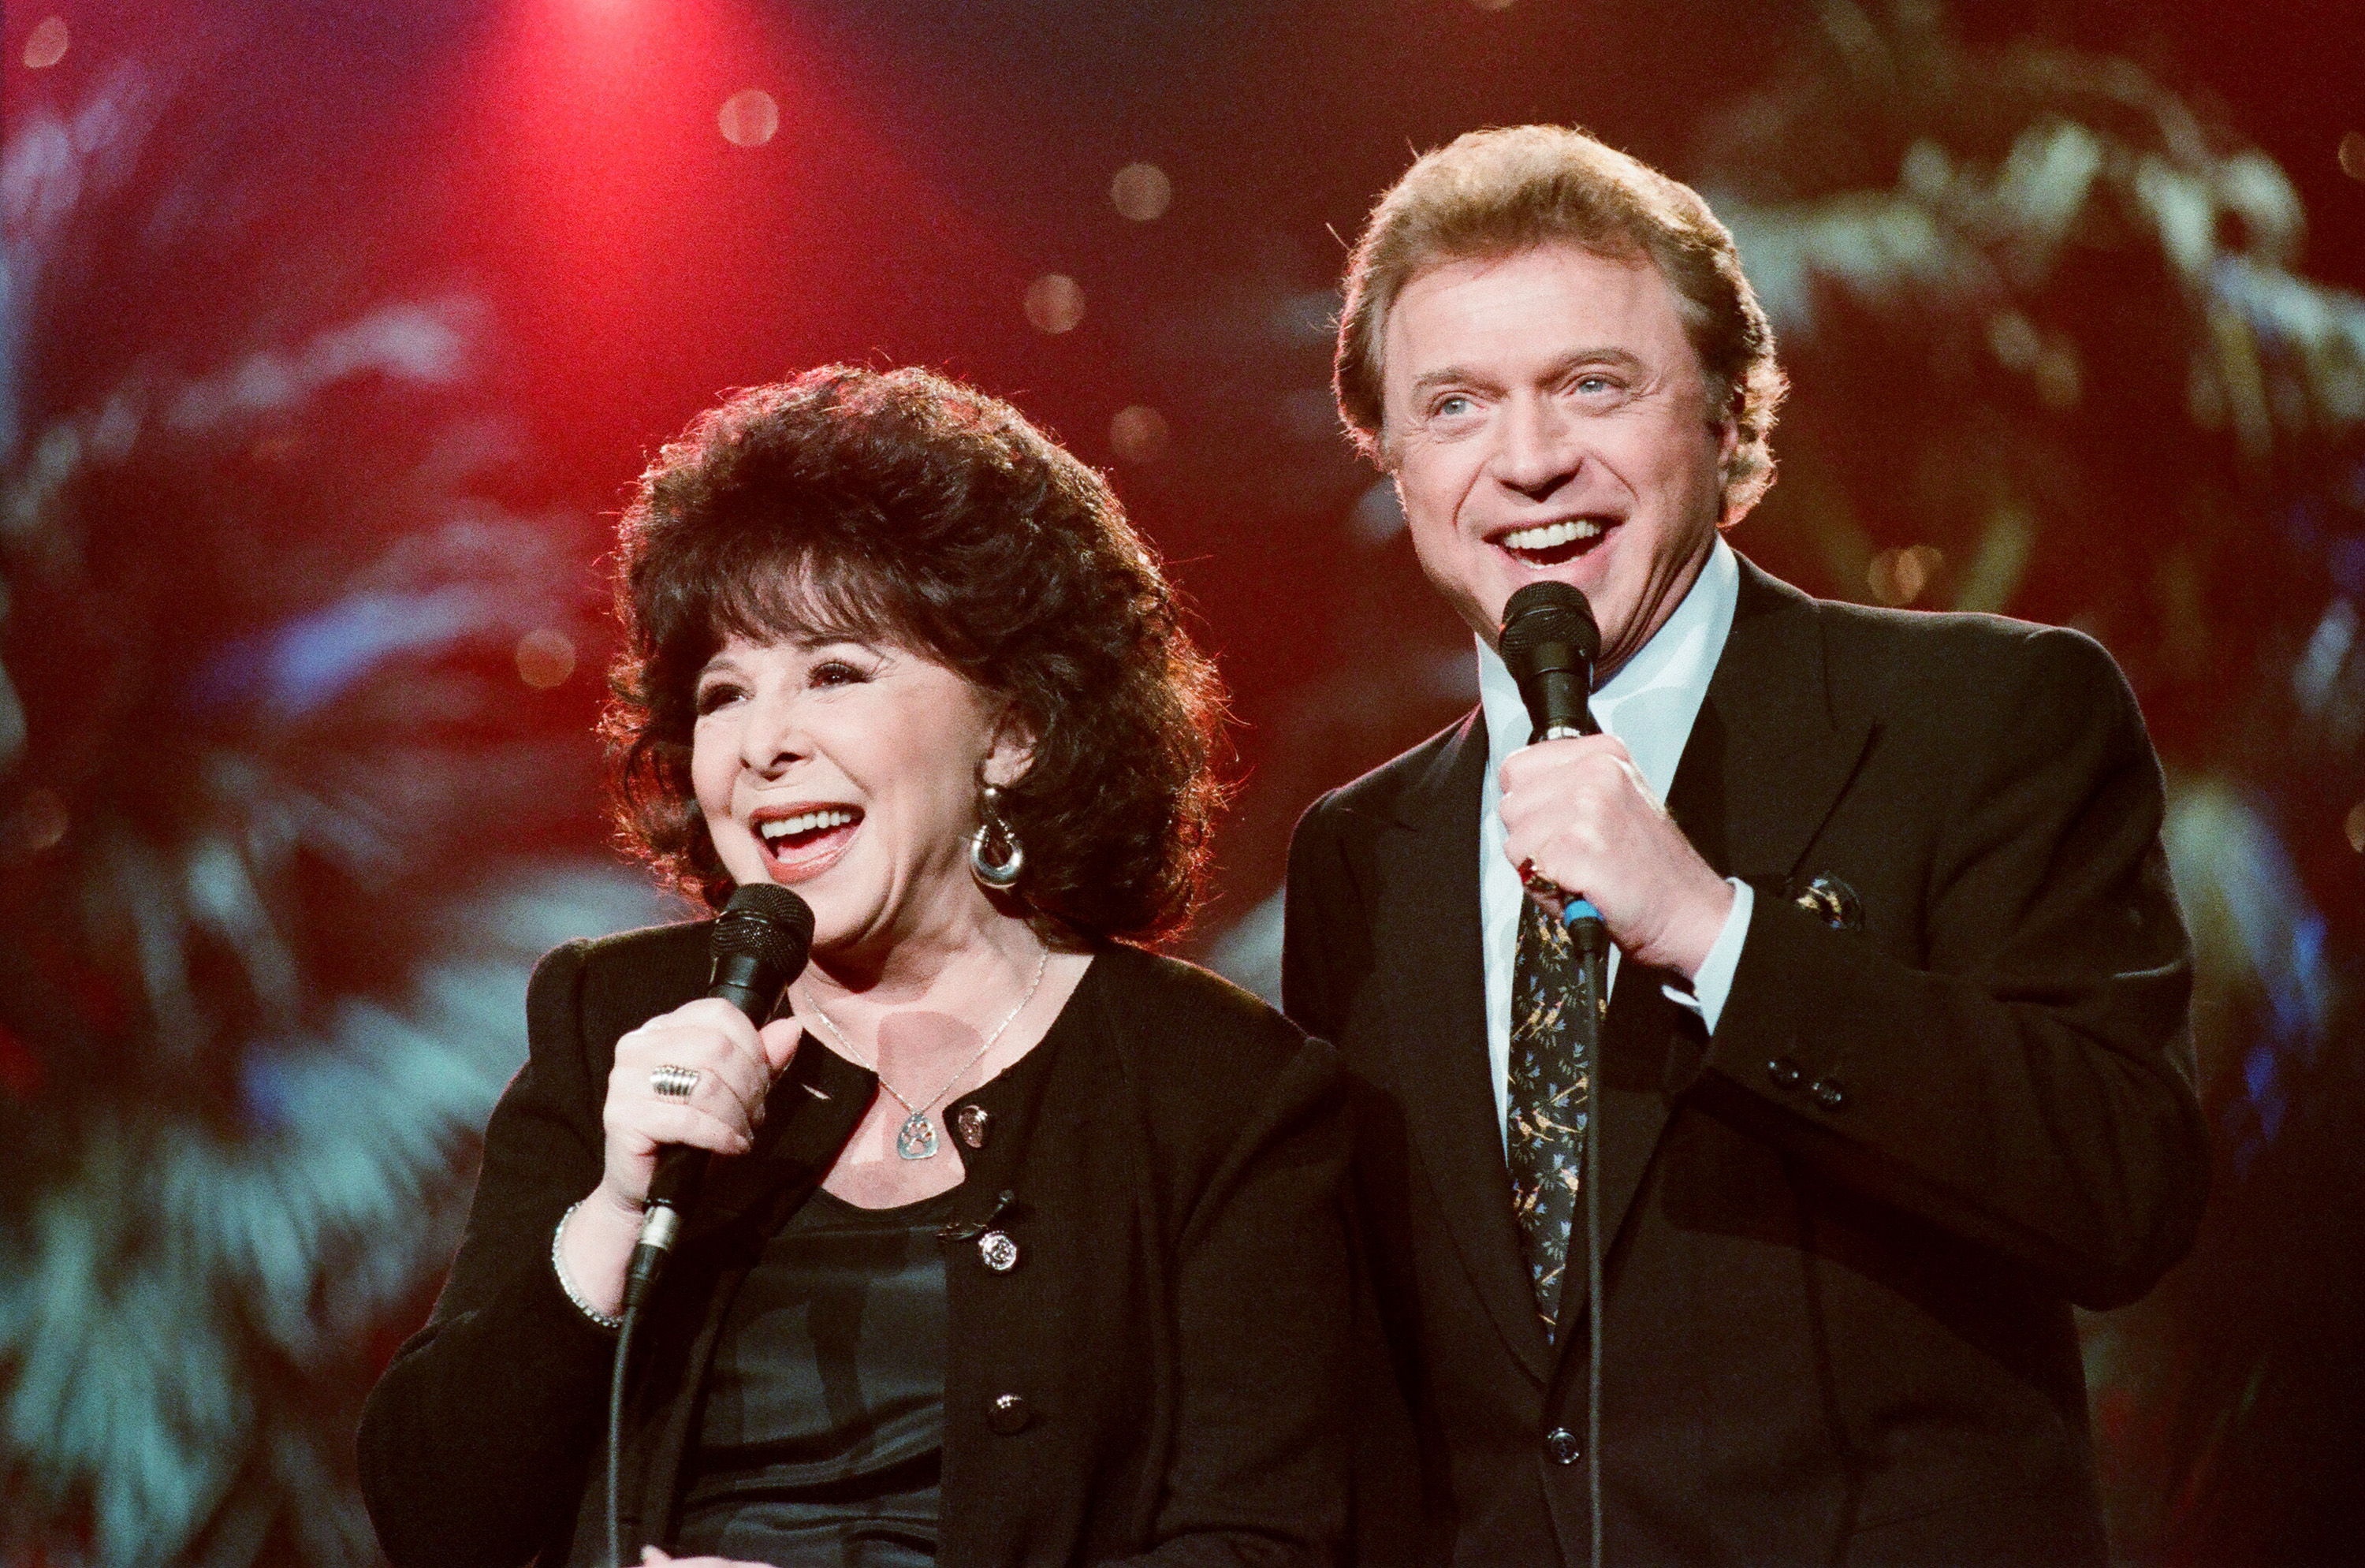 Eydie Gorme and Steve Lawrence perform on November 15, 1995. | Source: Getty Images